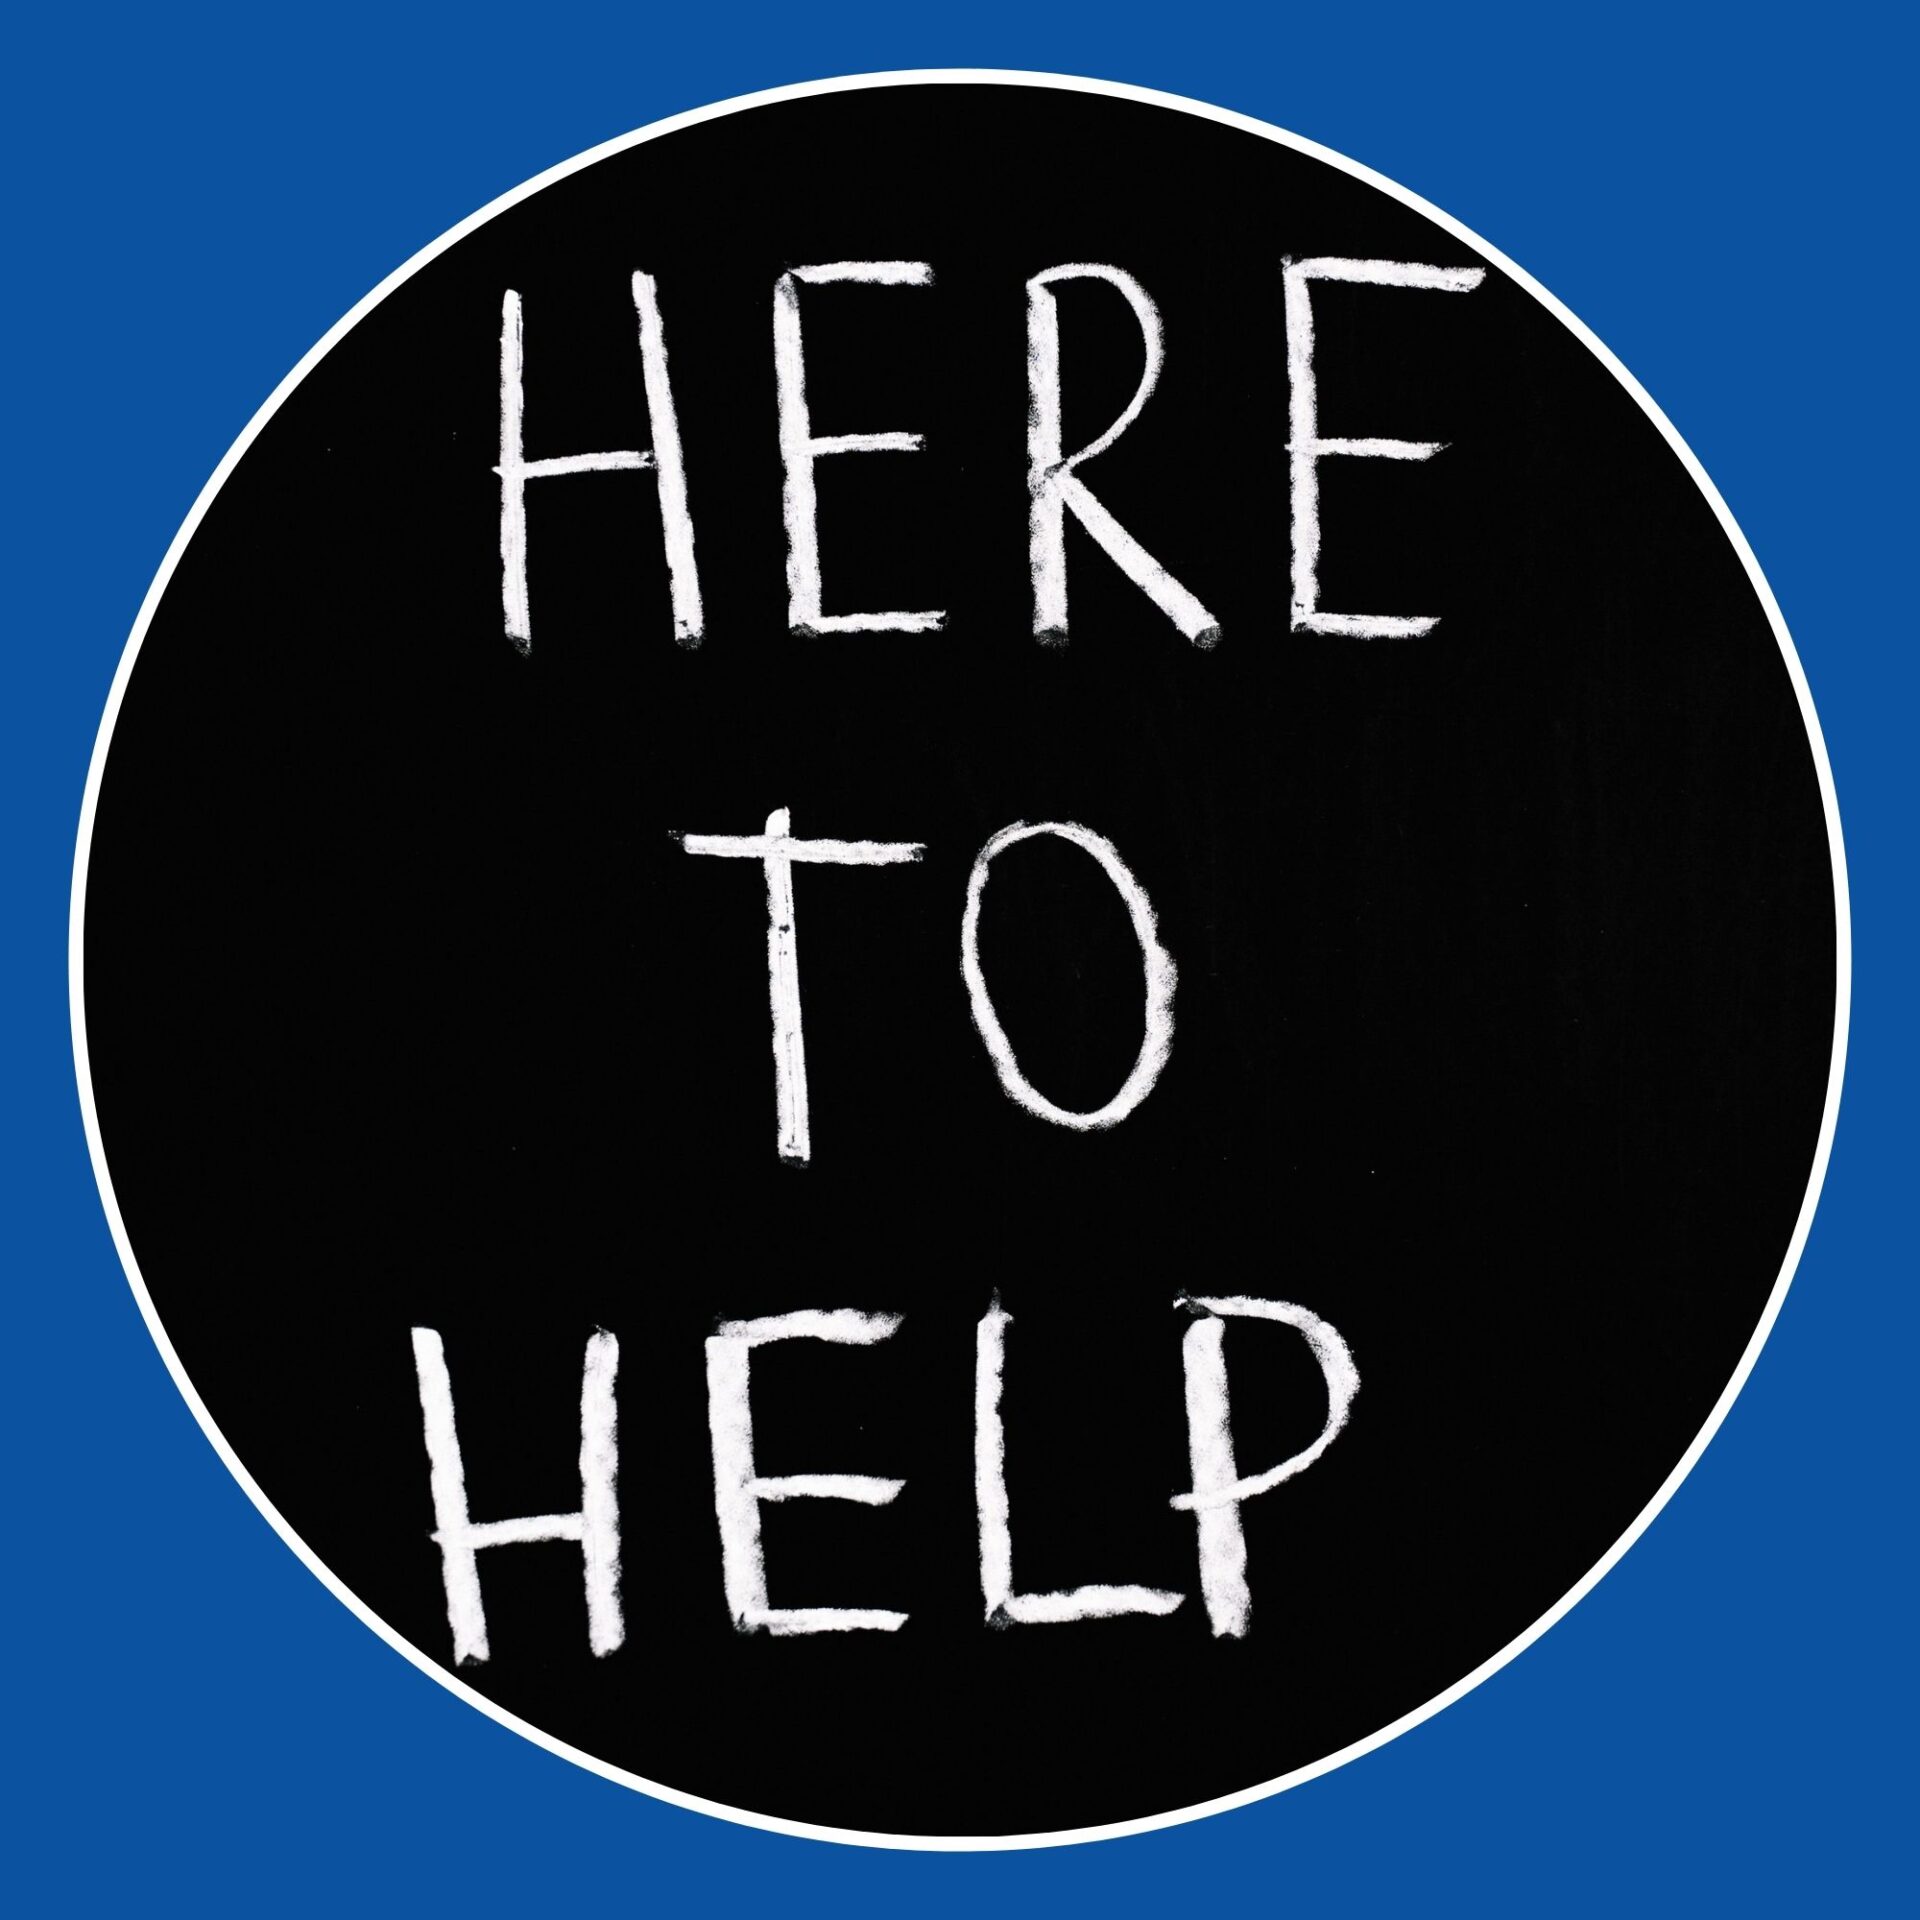 Image shows a chalkboard with 'Here to Help' written on it. Image from Pexels (Photographer is Anna Tarazevic)